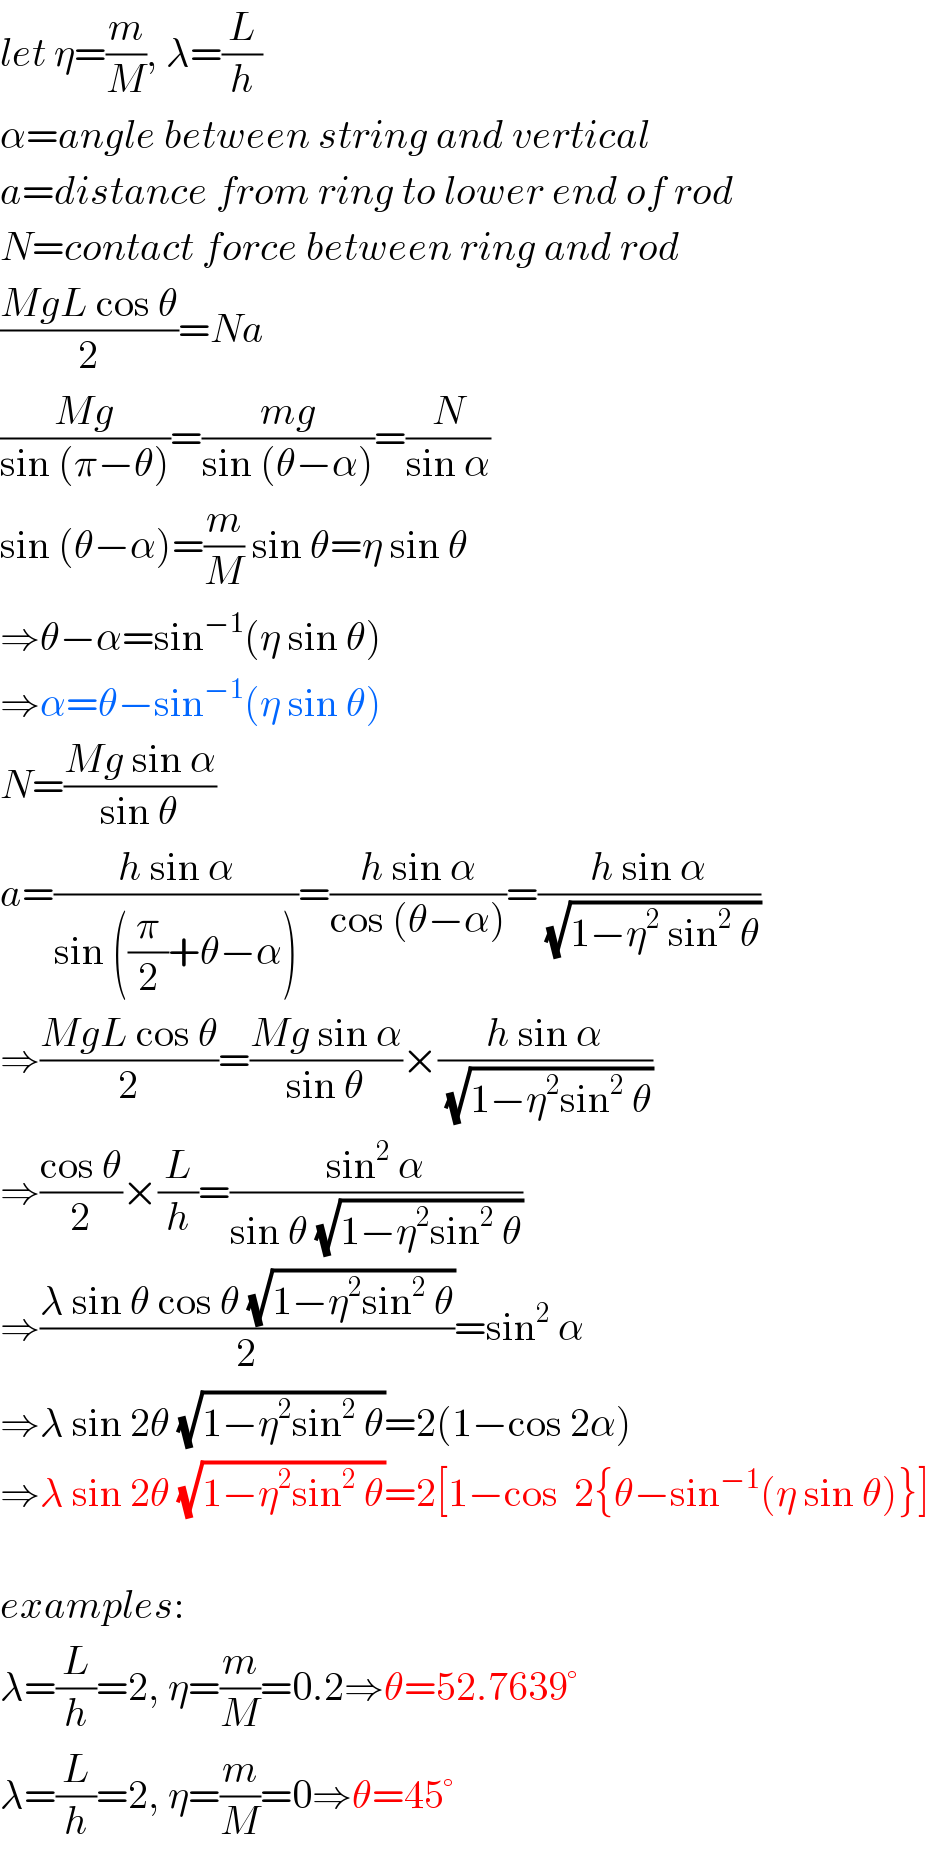 let η=(m/M), λ=(L/h)  α=angle between string and vertical  a=distance from ring to lower end of rod  N=contact force between ring and rod  ((MgL cos θ)/2)=Na  ((Mg)/(sin (π−θ)))=((mg)/(sin (θ−α)))=(N/(sin α))  sin (θ−α)=(m/M) sin θ=η sin θ  ⇒θ−α=sin^(−1) (η sin θ)  ⇒α=θ−sin^(−1) (η sin θ)  N=((Mg sin α)/(sin θ))  a=((h sin α)/(sin ((π/2)+θ−α)))=((h sin α)/(cos (θ−α)))=((h sin α)/(√(1−η^2  sin^2  θ)))  ⇒((MgL cos θ)/2)=((Mg sin α)/(sin θ))×((h sin α)/(√(1−η^2 sin^2  θ)))  ⇒((cos θ)/2)×(L/h)=((sin^2  α)/(sin θ (√(1−η^2 sin^2  θ))))  ⇒((λ sin θ cos θ (√(1−η^2 sin^2  θ)))/2)=sin^2  α  ⇒λ sin 2θ (√(1−η^2 sin^2  θ))=2(1−cos 2α)  ⇒λ sin 2θ (√(1−η^2 sin^2  θ))=2[1−cos  2{θ−sin^(−1) (η sin θ)}]    examples:  λ=(L/h)=2, η=(m/M)=0.2⇒θ=52.7639°  λ=(L/h)=2, η=(m/M)=0⇒θ=45°  